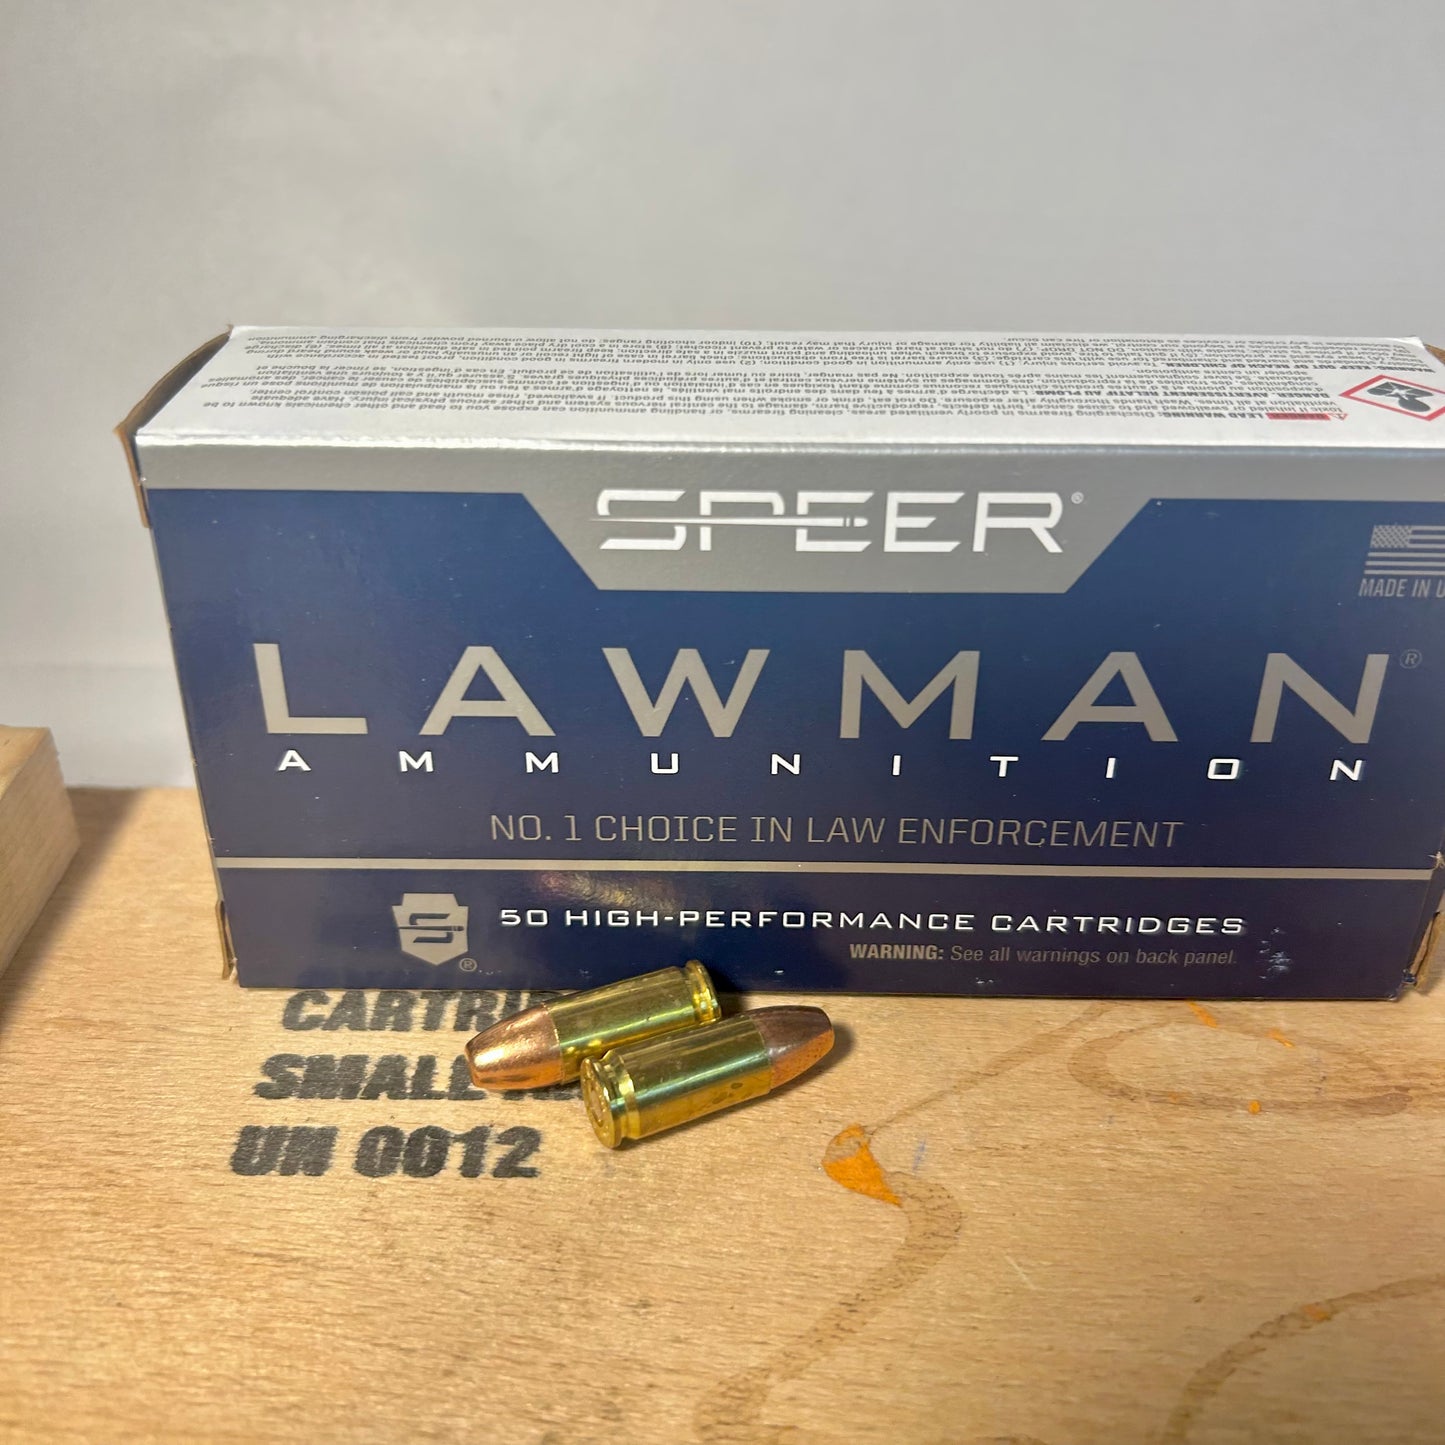 Free Shipping - 1000 Round Case Speer Lawman 9mm Luger Ammo 147gr TMJ Subsonic - 53620